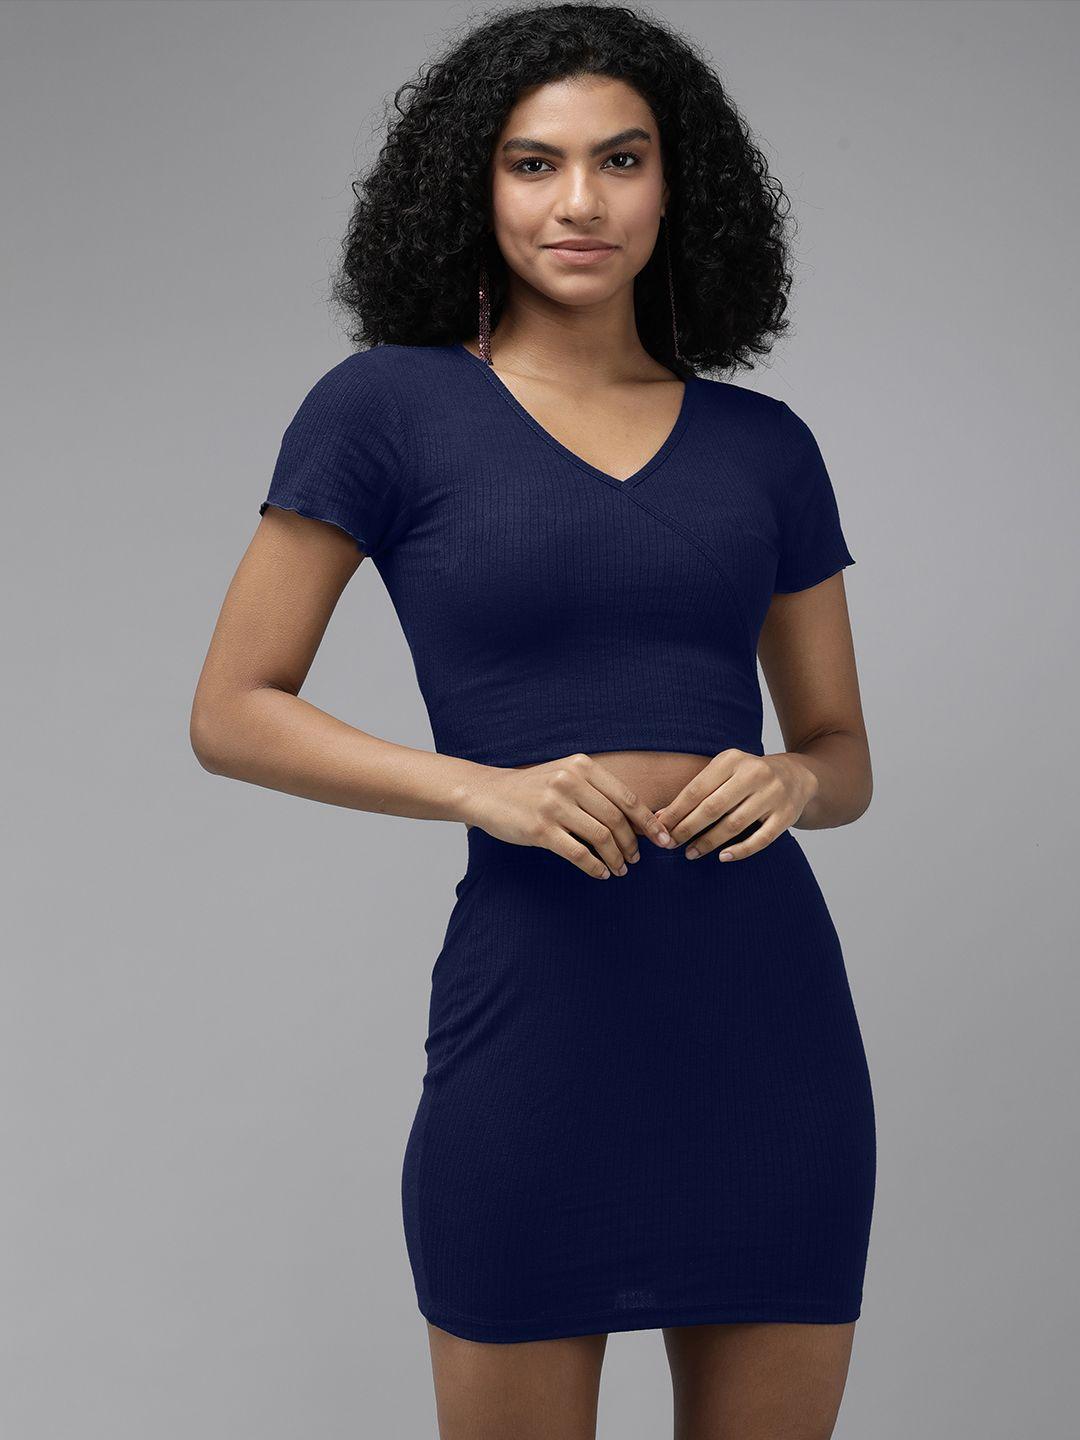 the roadster lifestyle co blue ribbed cropped top with skirt